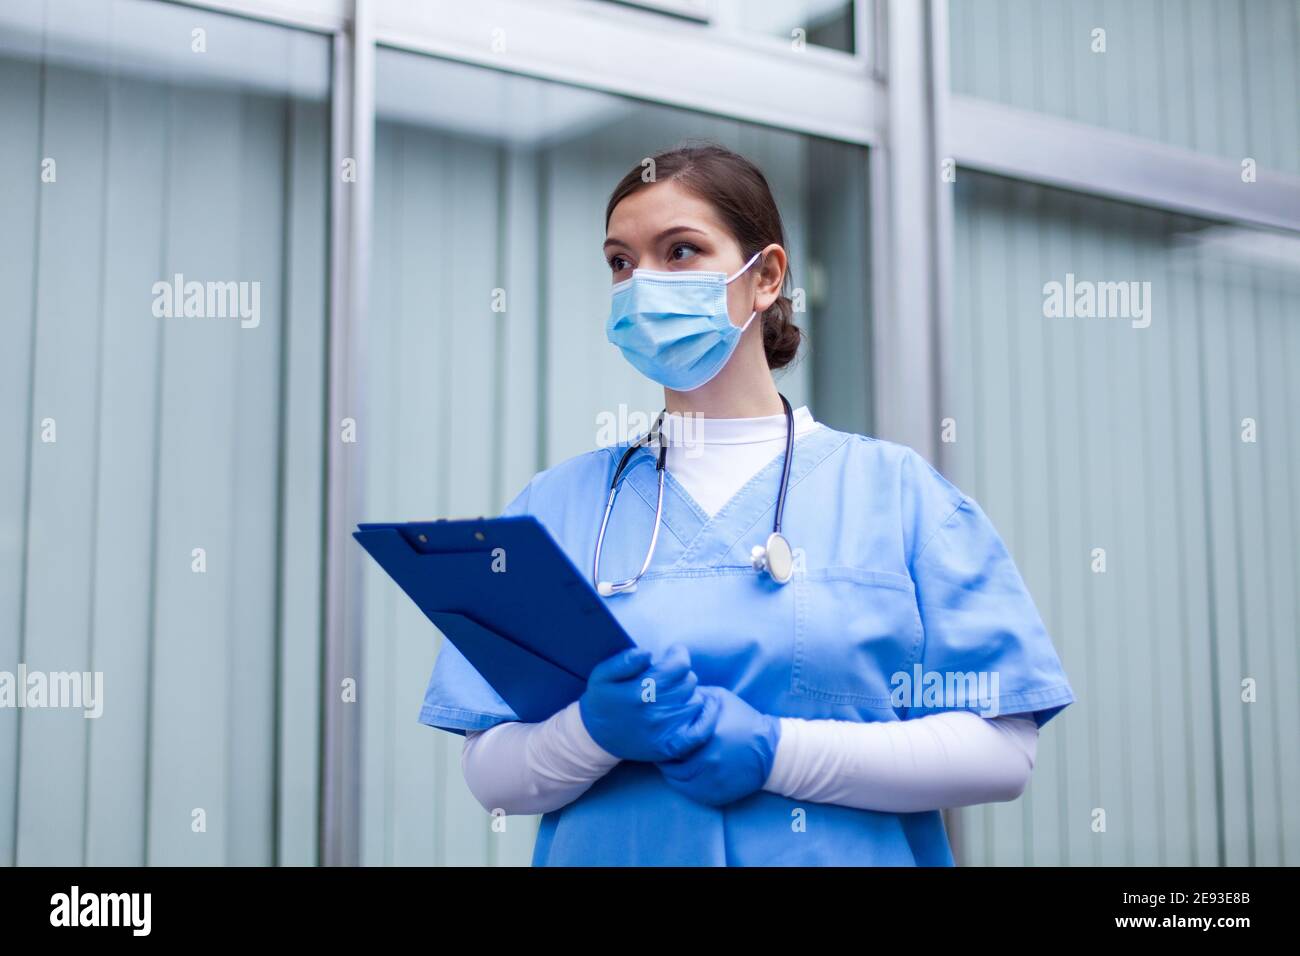 Female UK NHS ICU medical worker,woman doctor holding clipboard wearing PPE blue protective scrubs face mask,front line emergency medic,COVID-19 pande Stock Photo